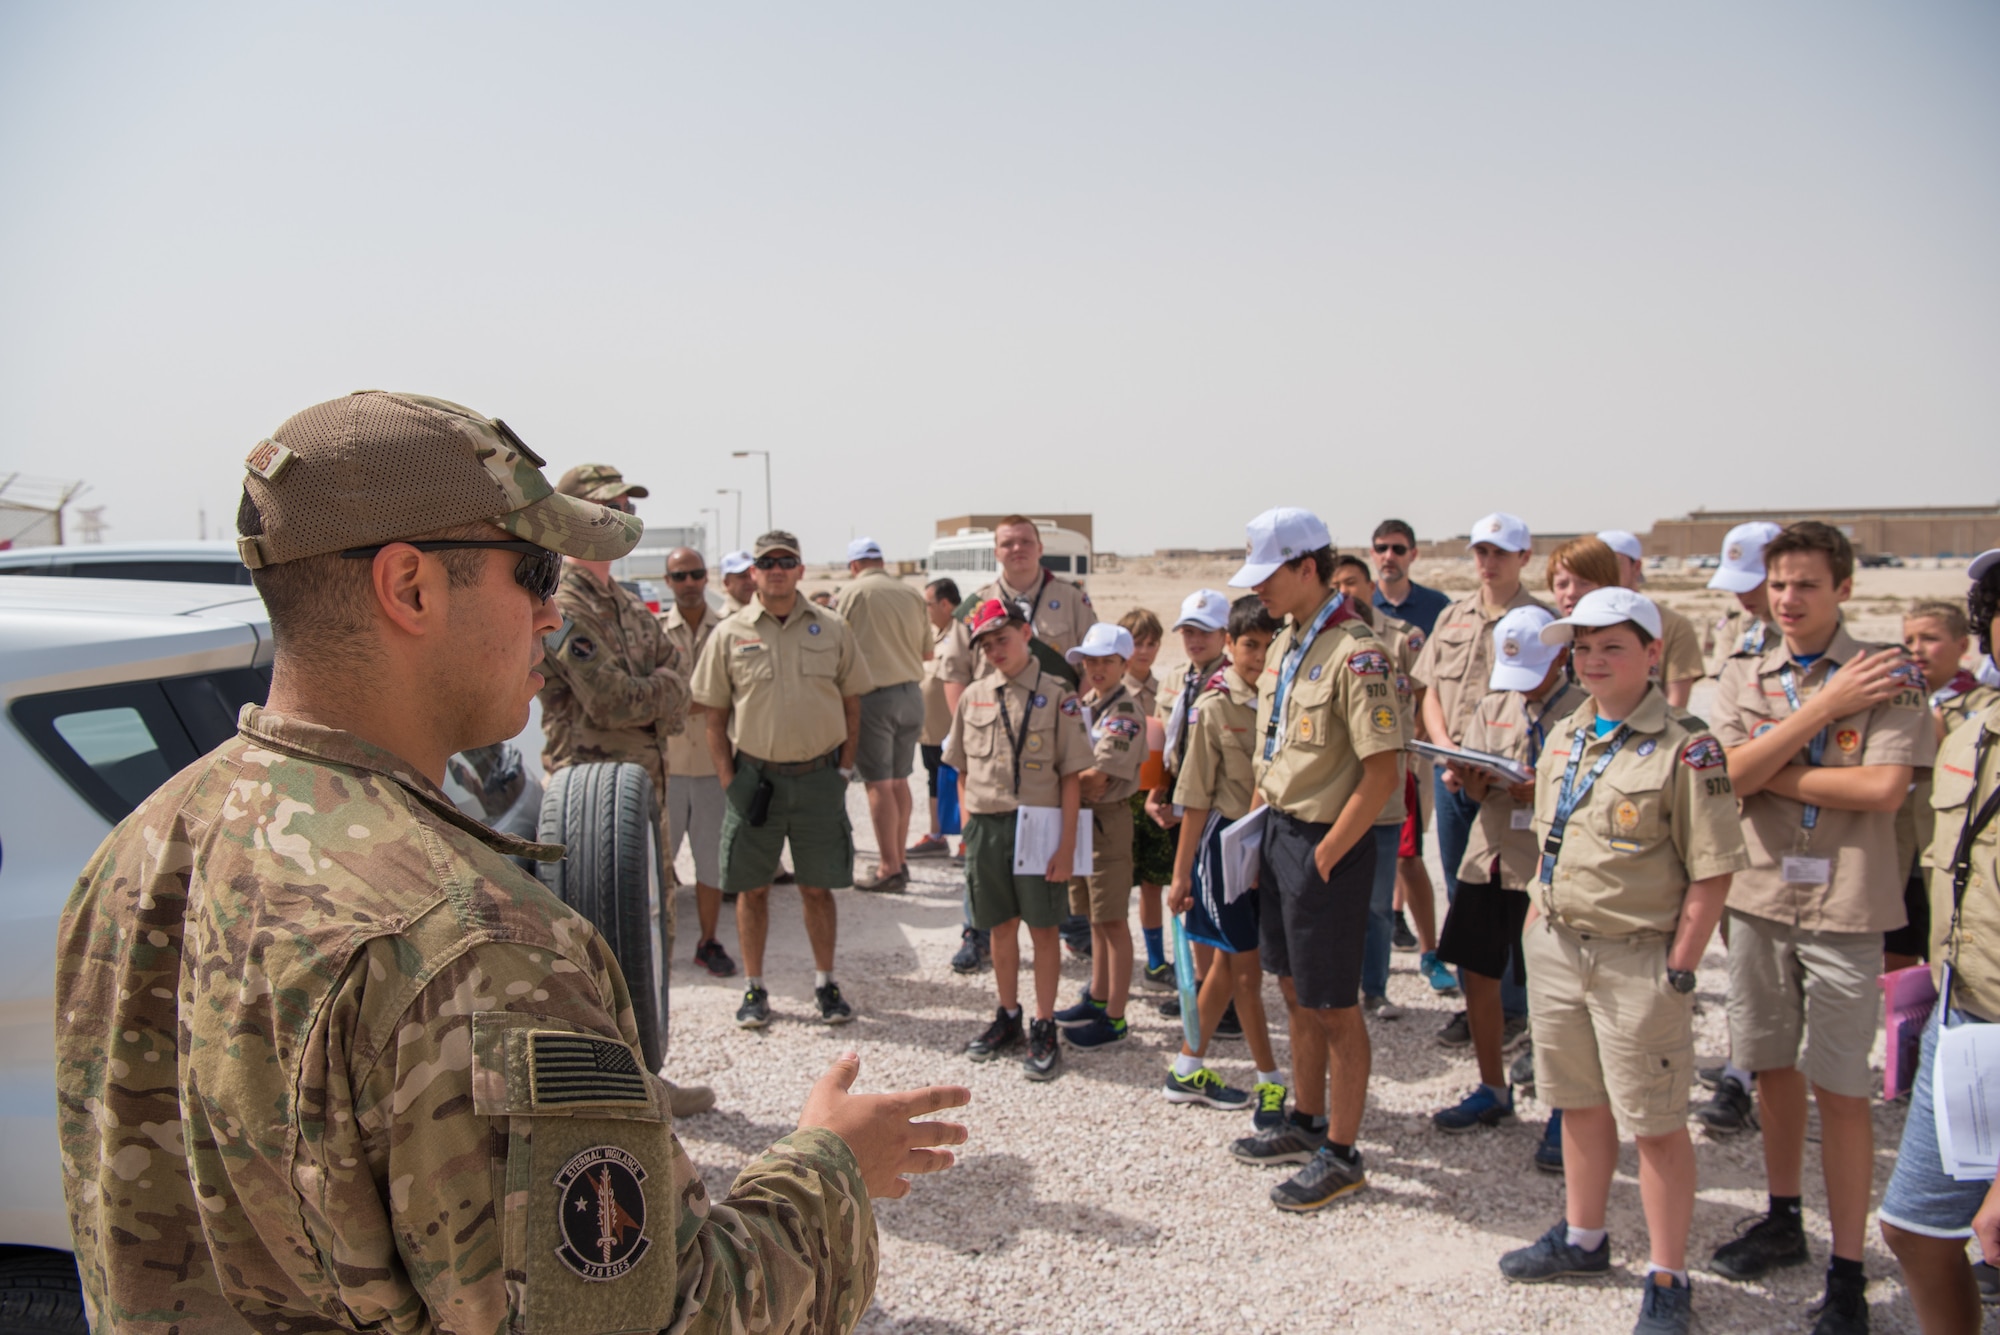 Staff Sgt. Marcus Lavalais, kennel master for the 379th Expeditionary Security Forces Squadron, briefs Boy Scouts from three different troops during a tour of Al Udeid Air Base, Qatar, April 21, 2018. The two-day visit, which was collaboratively coordinated by the 379th Air Expeditionary Wing and Qatar Emiri Air Force, provided the scouts a chance to earn merit badges, including the Aviation Merit Badge. (U.S. Air Force photo by Staff Sgt. Joshua Horton)